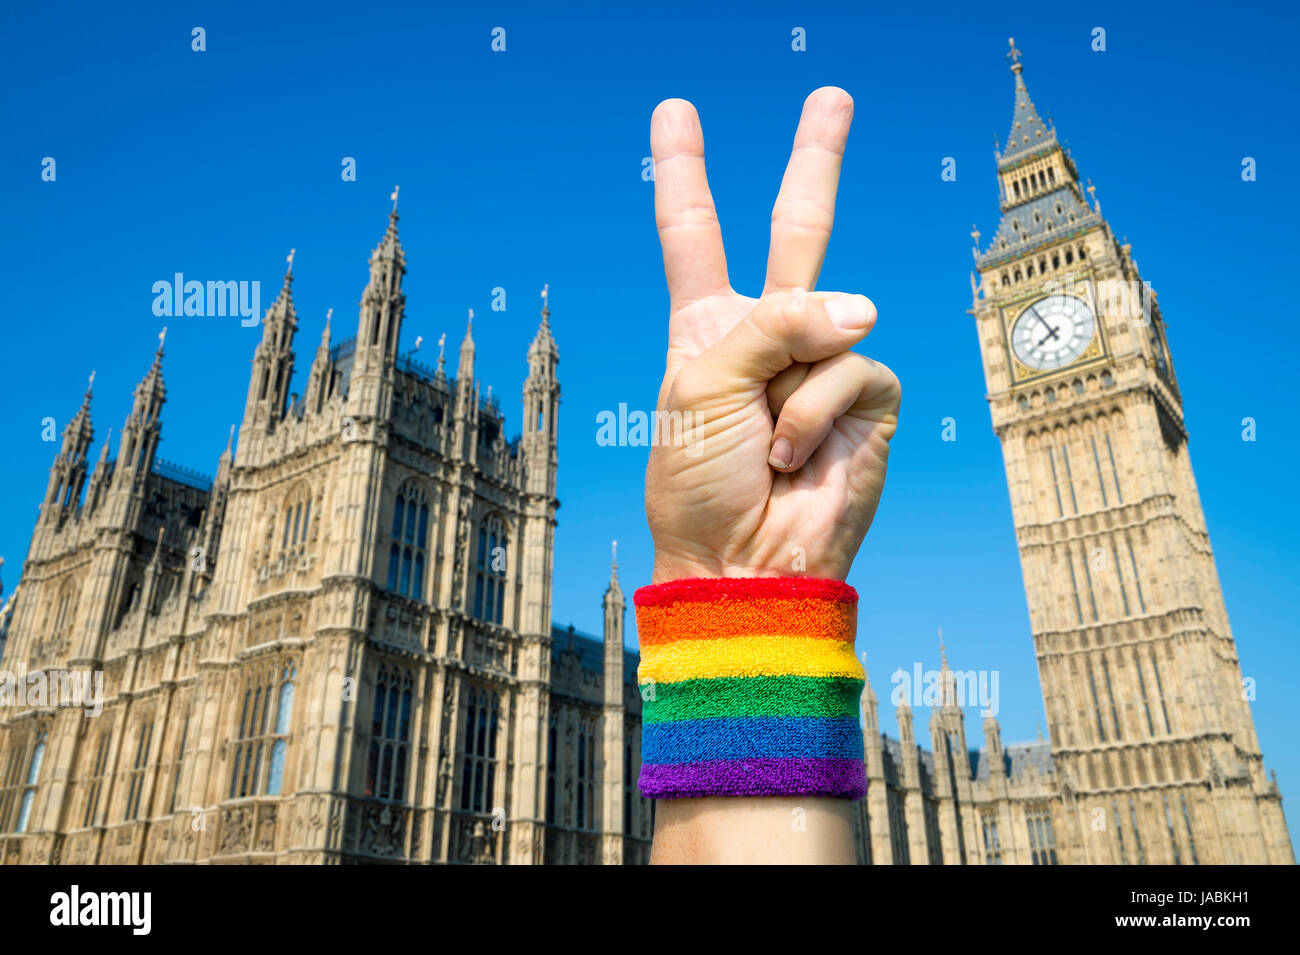 Hand wearing gay pride rainbow flag wristband holding up a victory/peace sign gesture in front of the Houses of Parliament at Westminster, London, UK Stock Photo